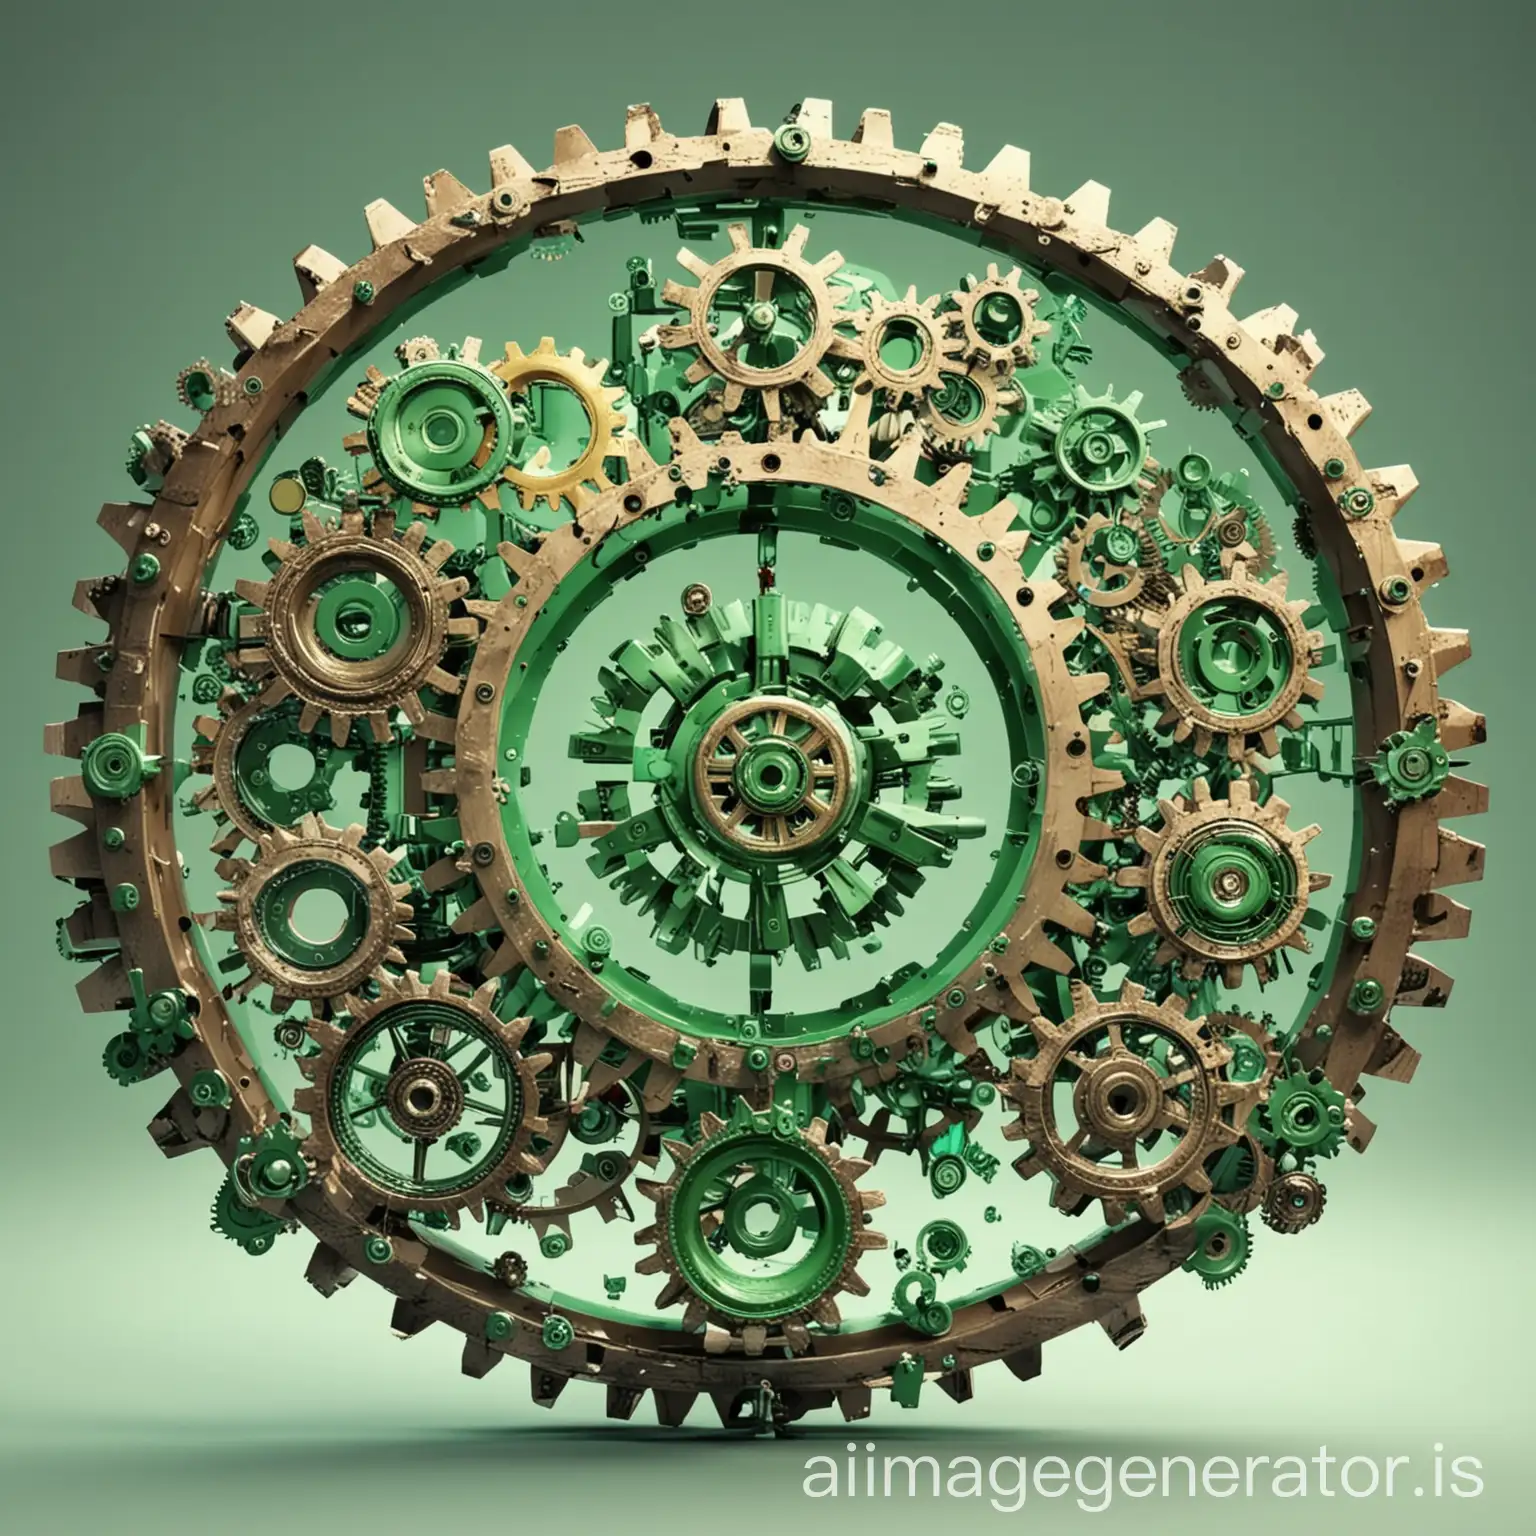 cogs displaying economic growth, AI/digitalization, inequality reduction, green technologies. The cogs should be animated, one filled with a symbol of each mentioned concept. Please revise the final image by removing the people and background, only showing the system of gears.